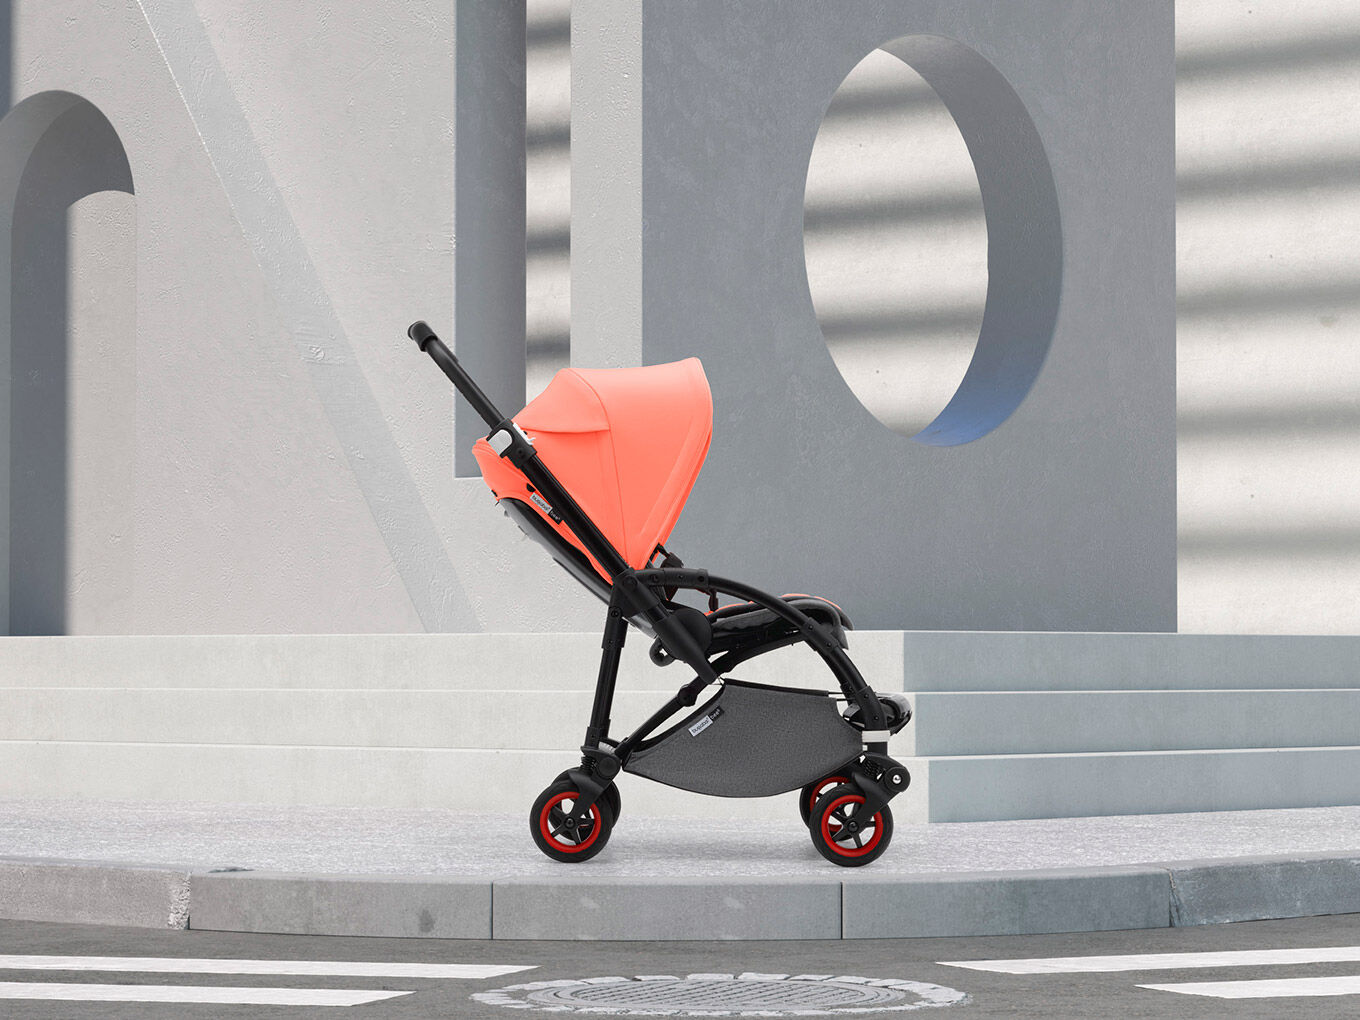 bugaboo donkey special edition